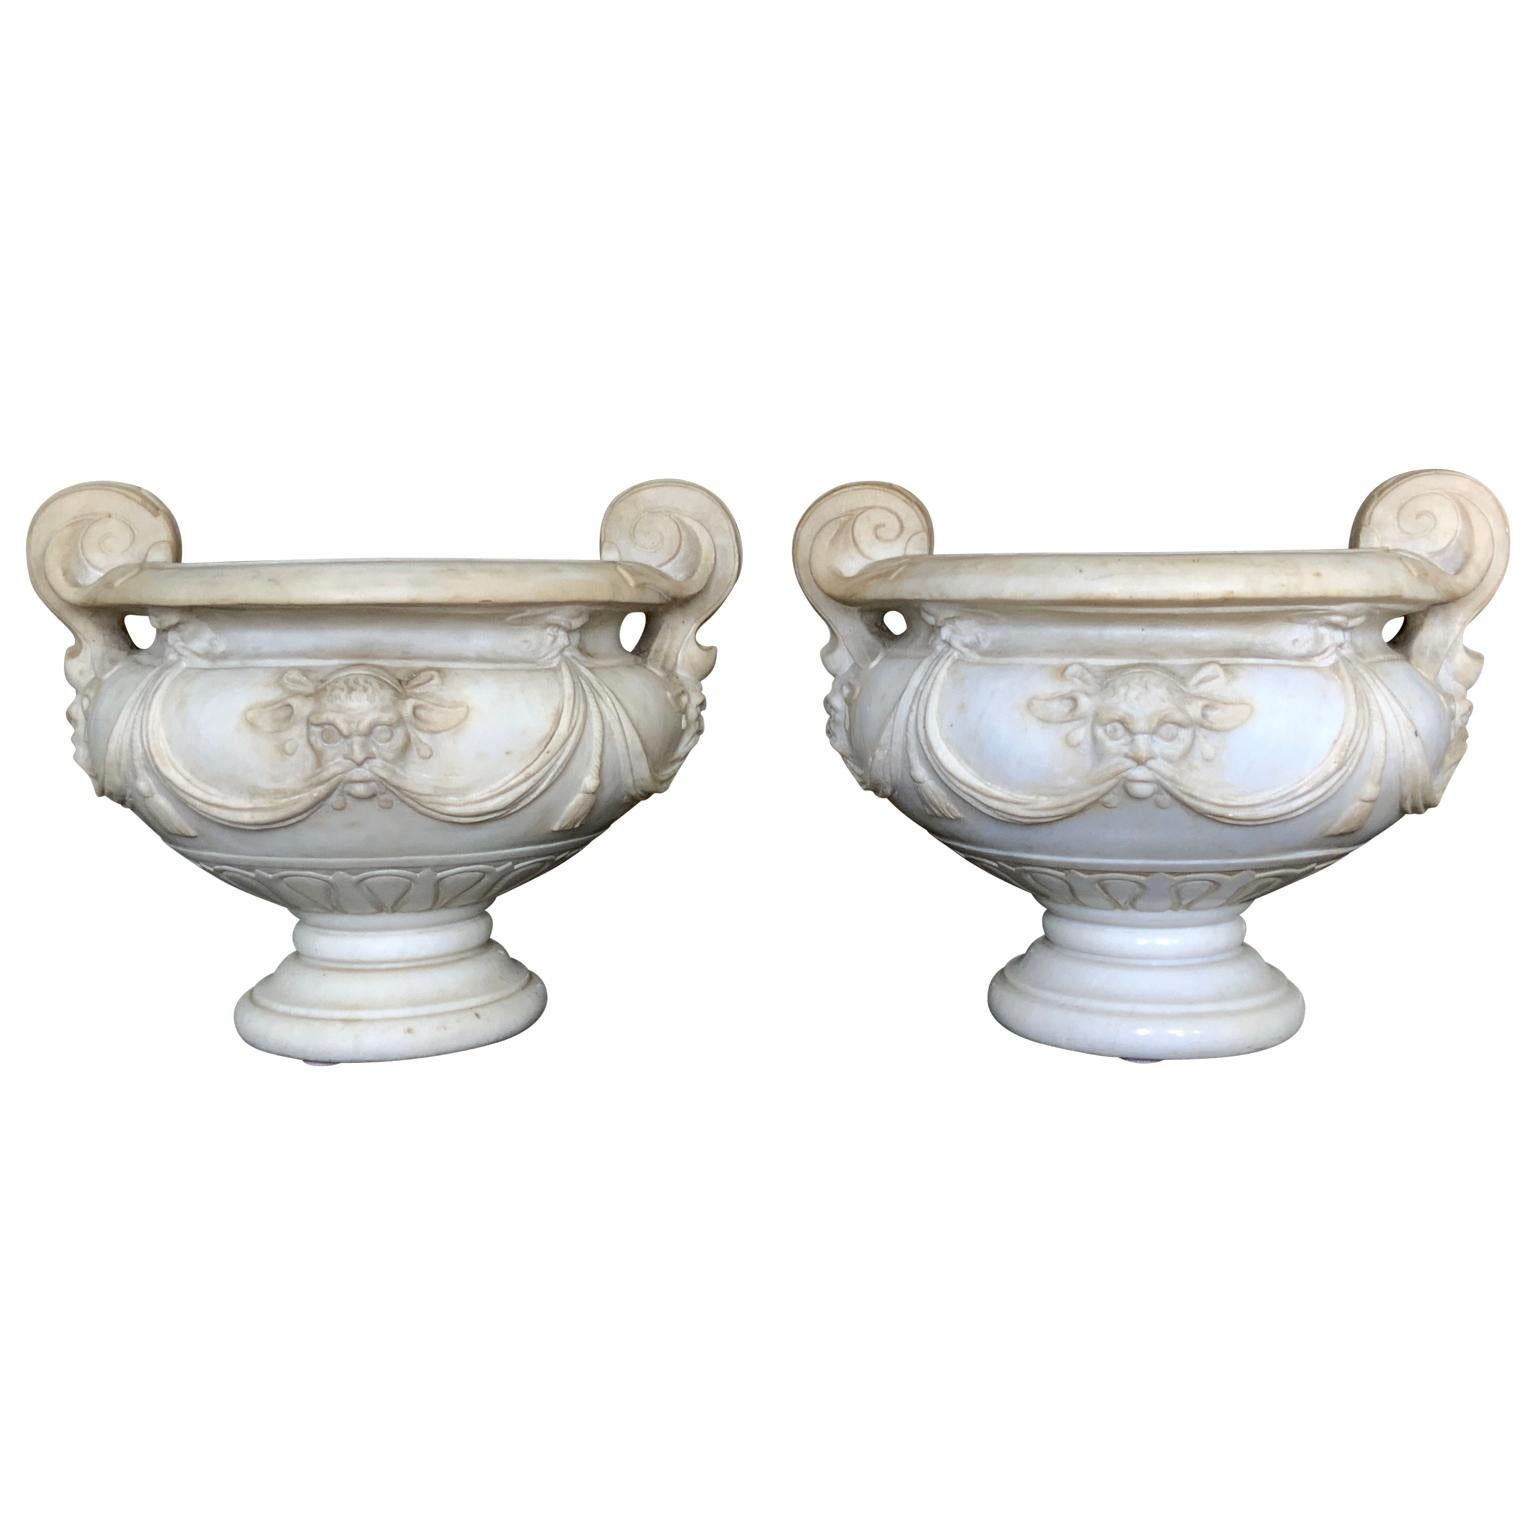 Two Italian late 18th century Rococo hand carved white marble garden urns
A rare pair of white marble garden urns. Wonderfully decorated with heads and tassels.
Both are a great version of urns with handle form.